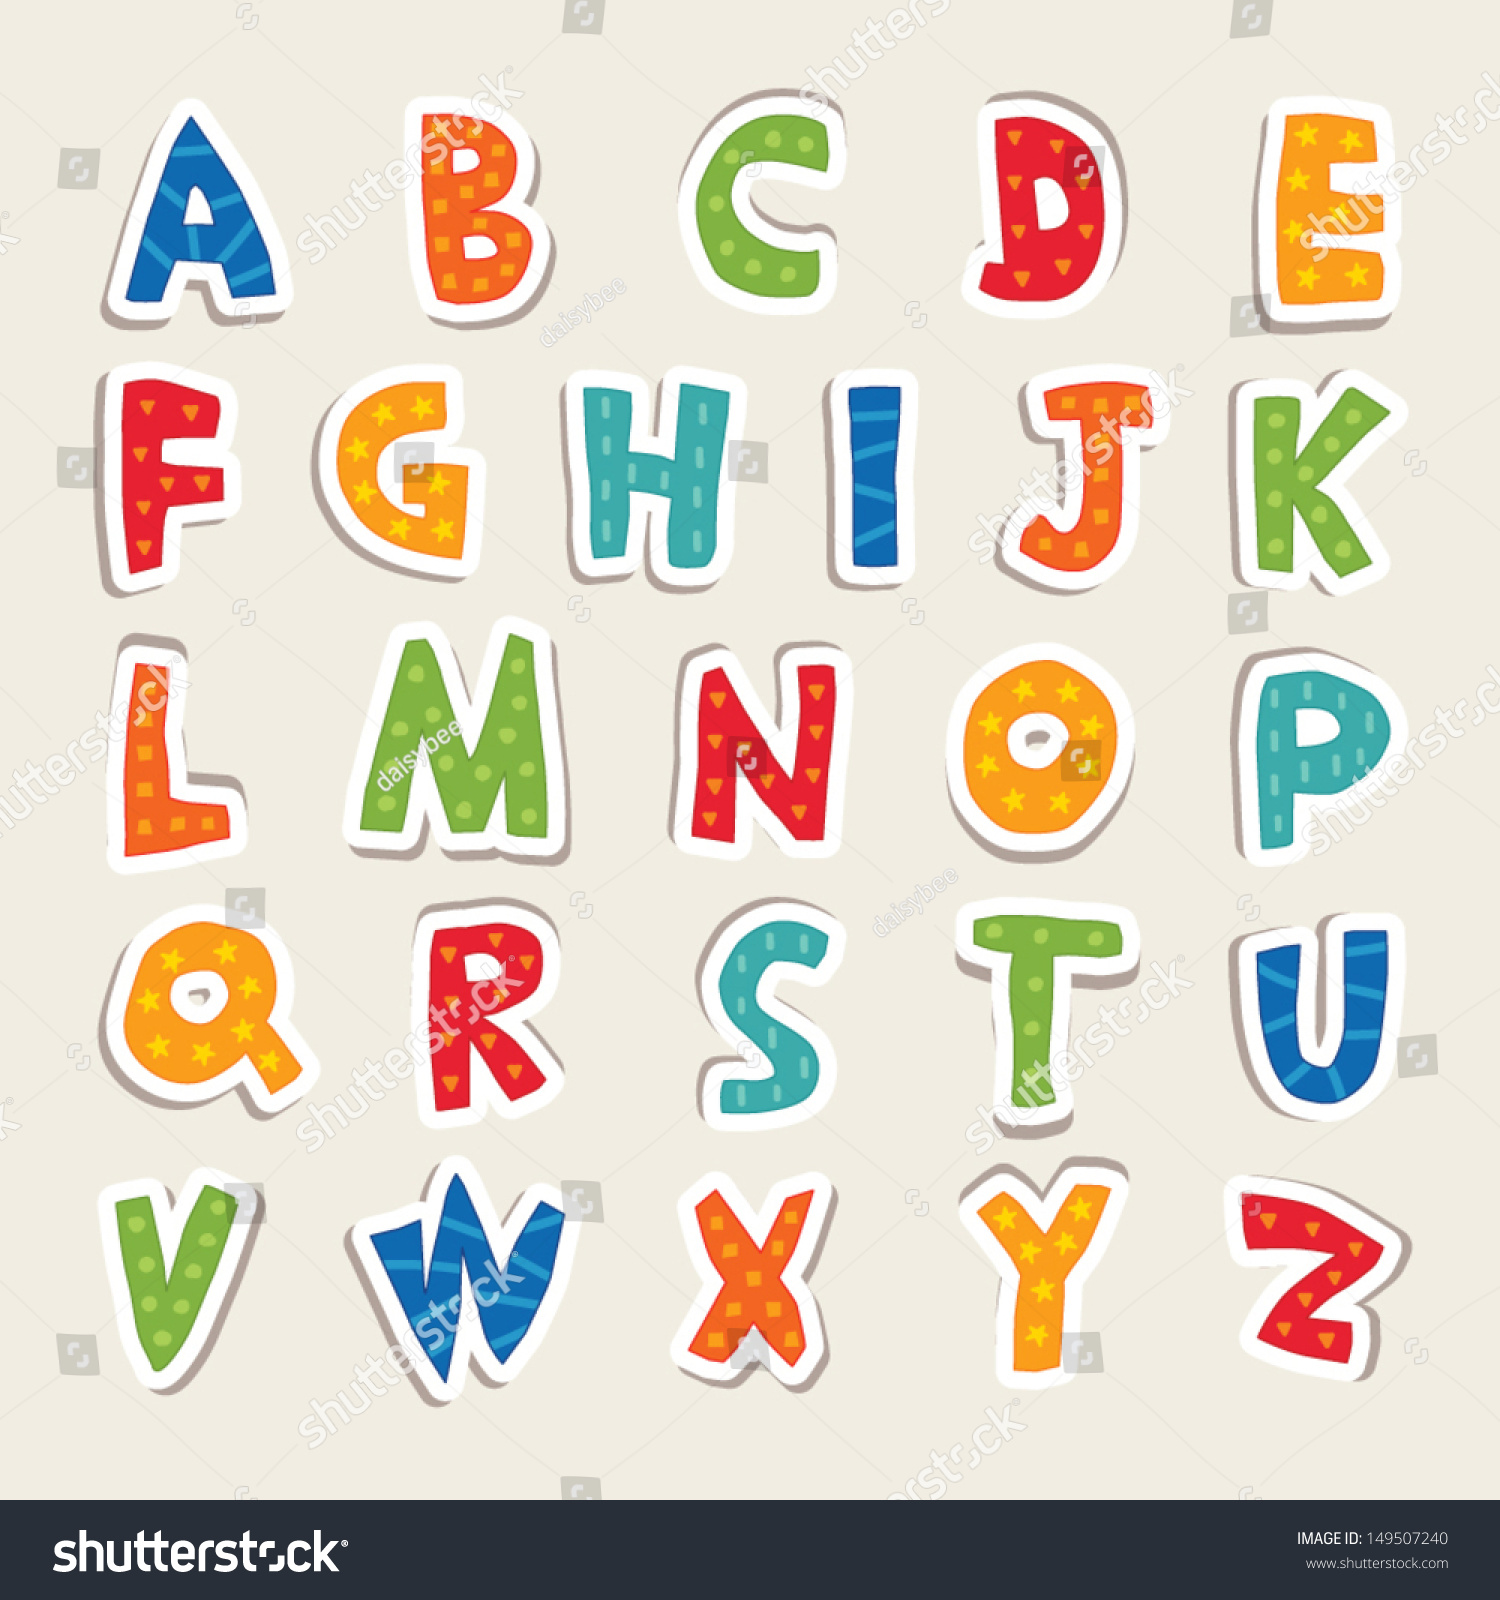 Hand Cut Vector Alphabet Sticker Set In Bright Vintage Colors. Good For ...